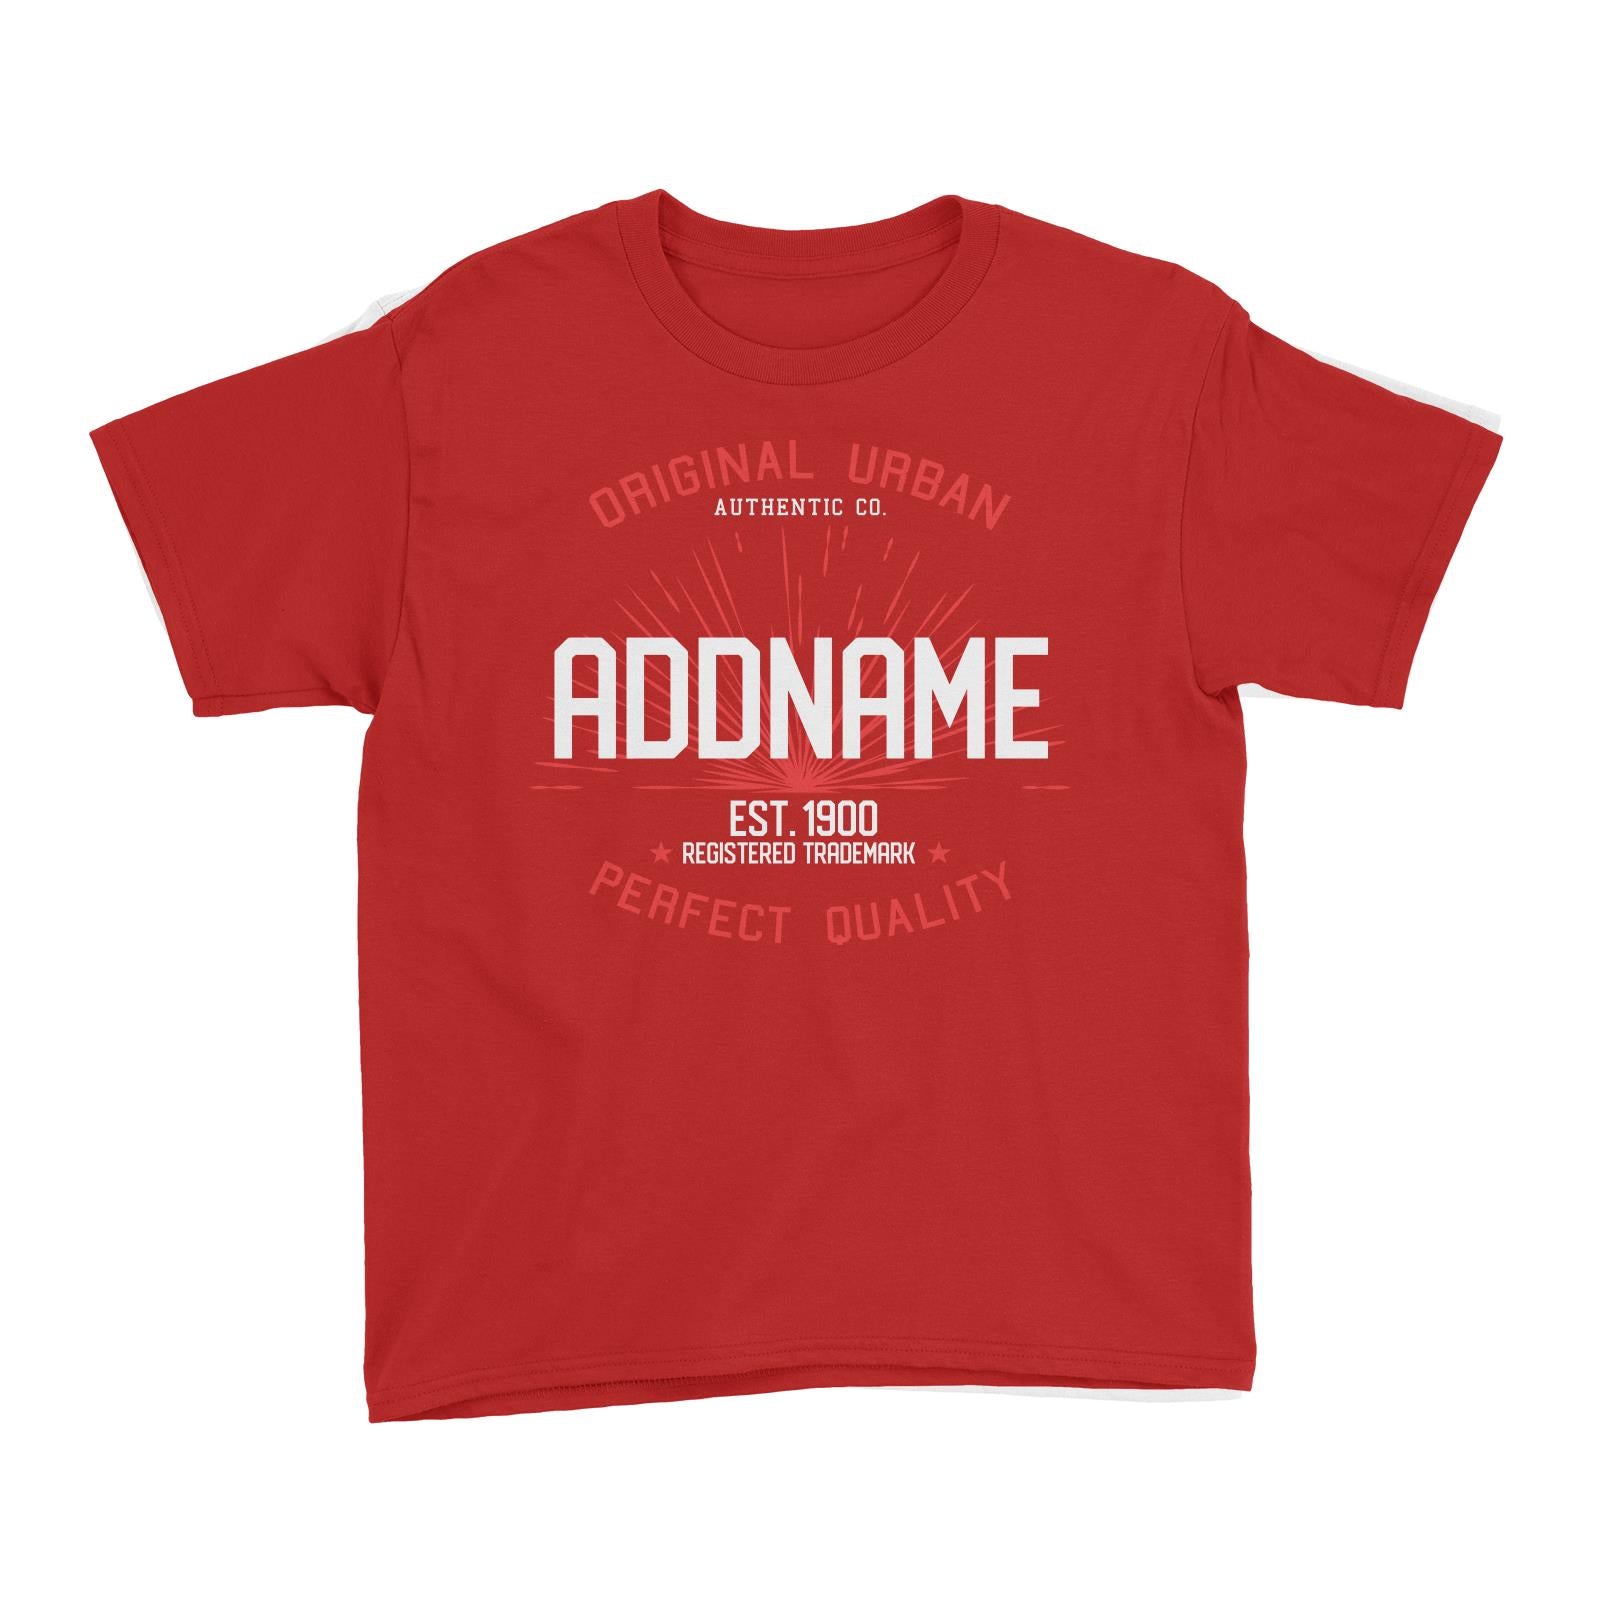 Original Urban Authentic Co. Personalizable with Name and Year Kid's T-Shirt